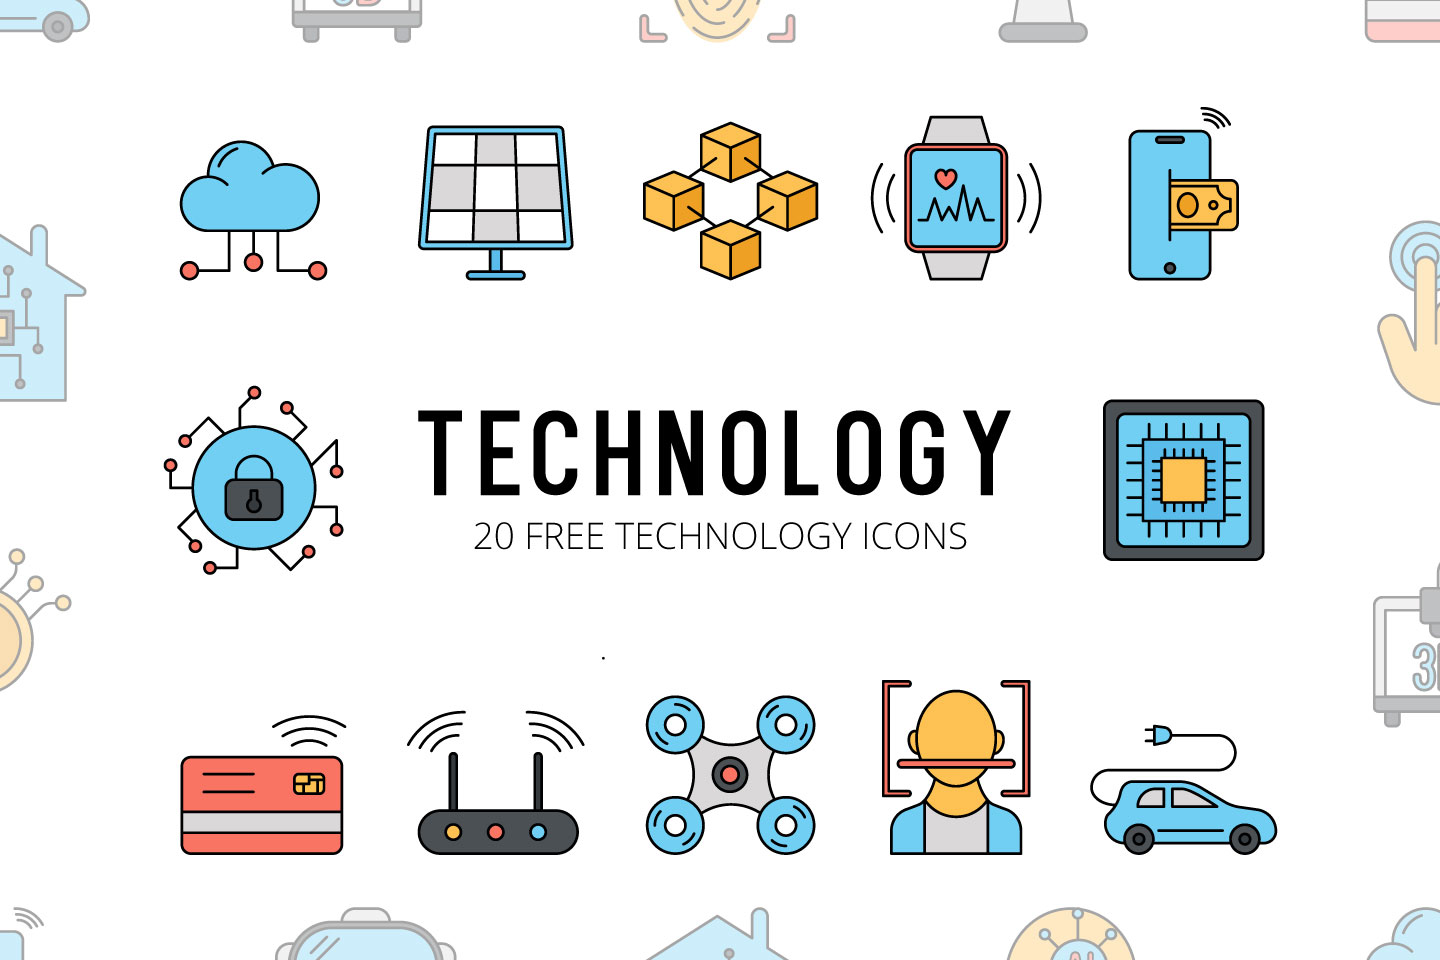 Download Technology Vector Free Icon Set - GraphicSurf.com